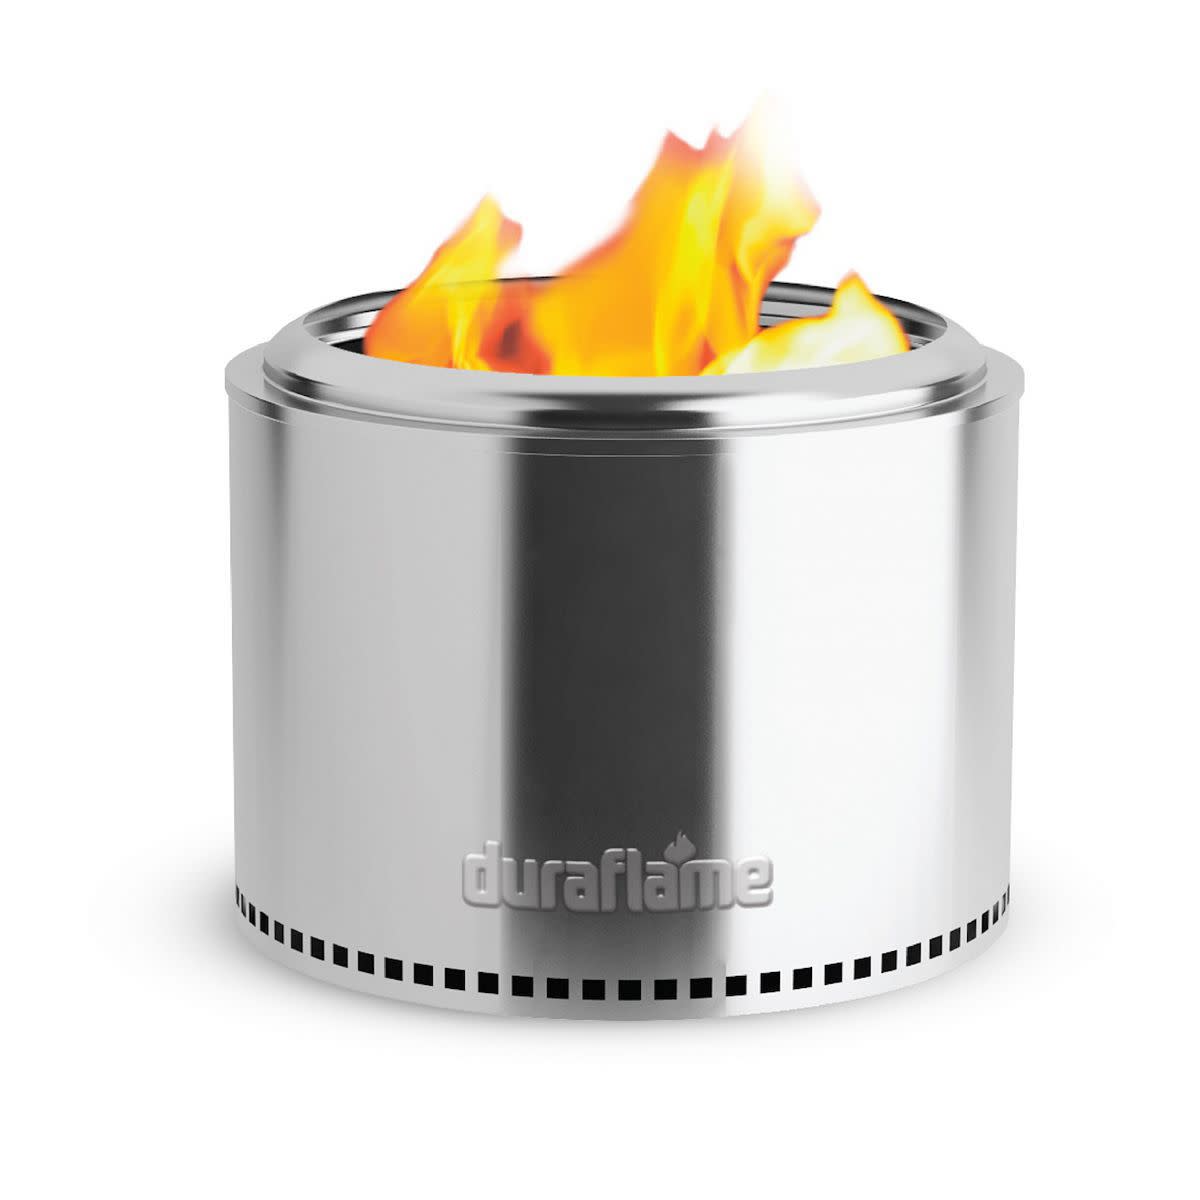 product shot of duraflame stainless steel smokeless fire put 19 inches